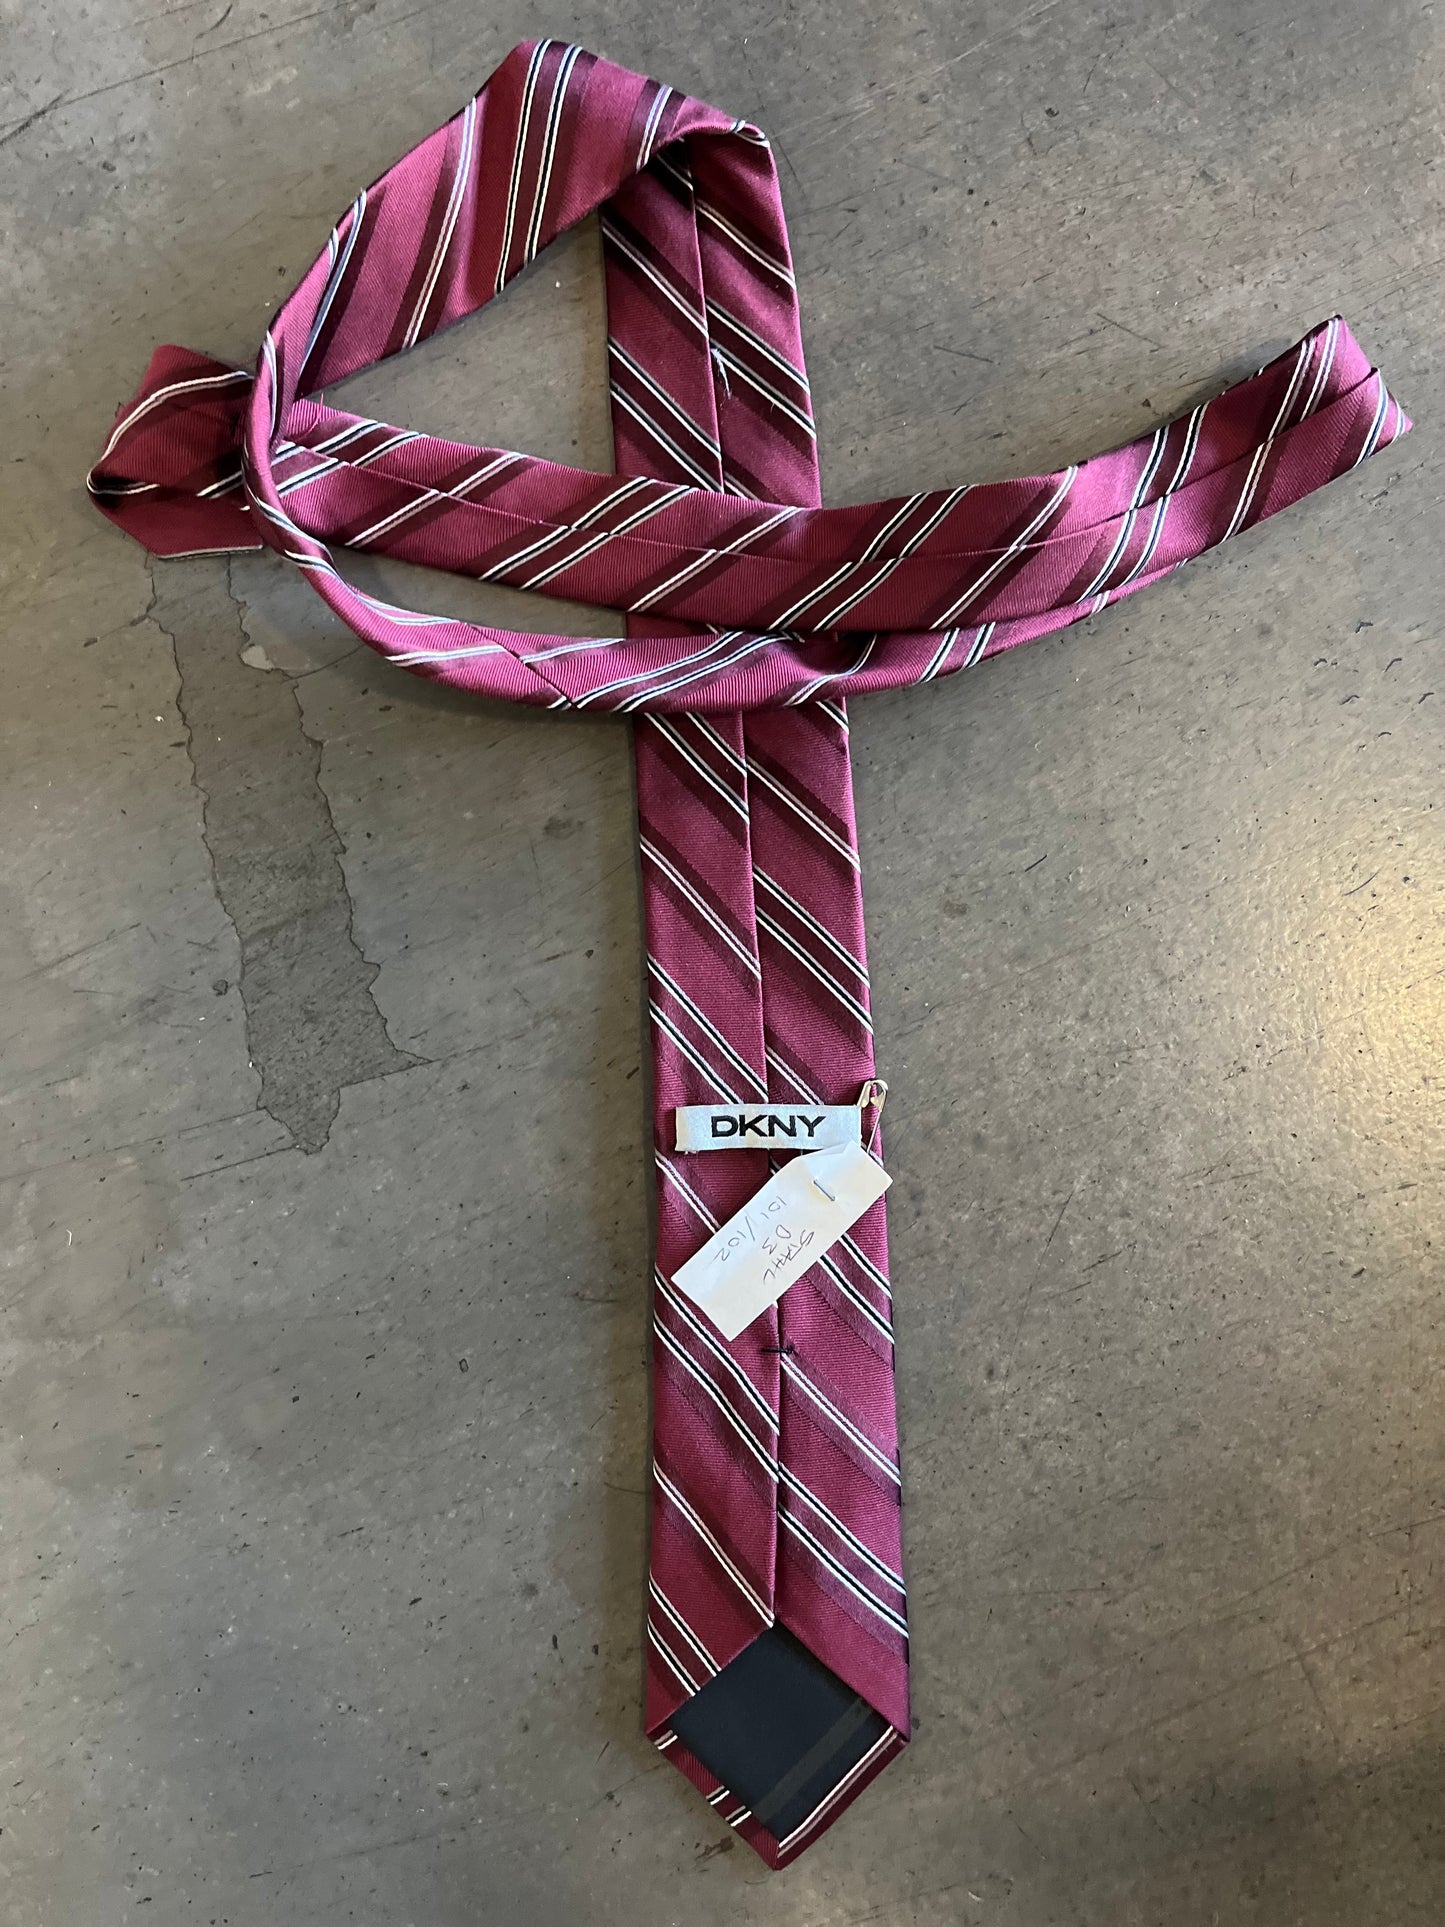 SHADES OF BLUE: Stahl's Red Striped HERO Tie